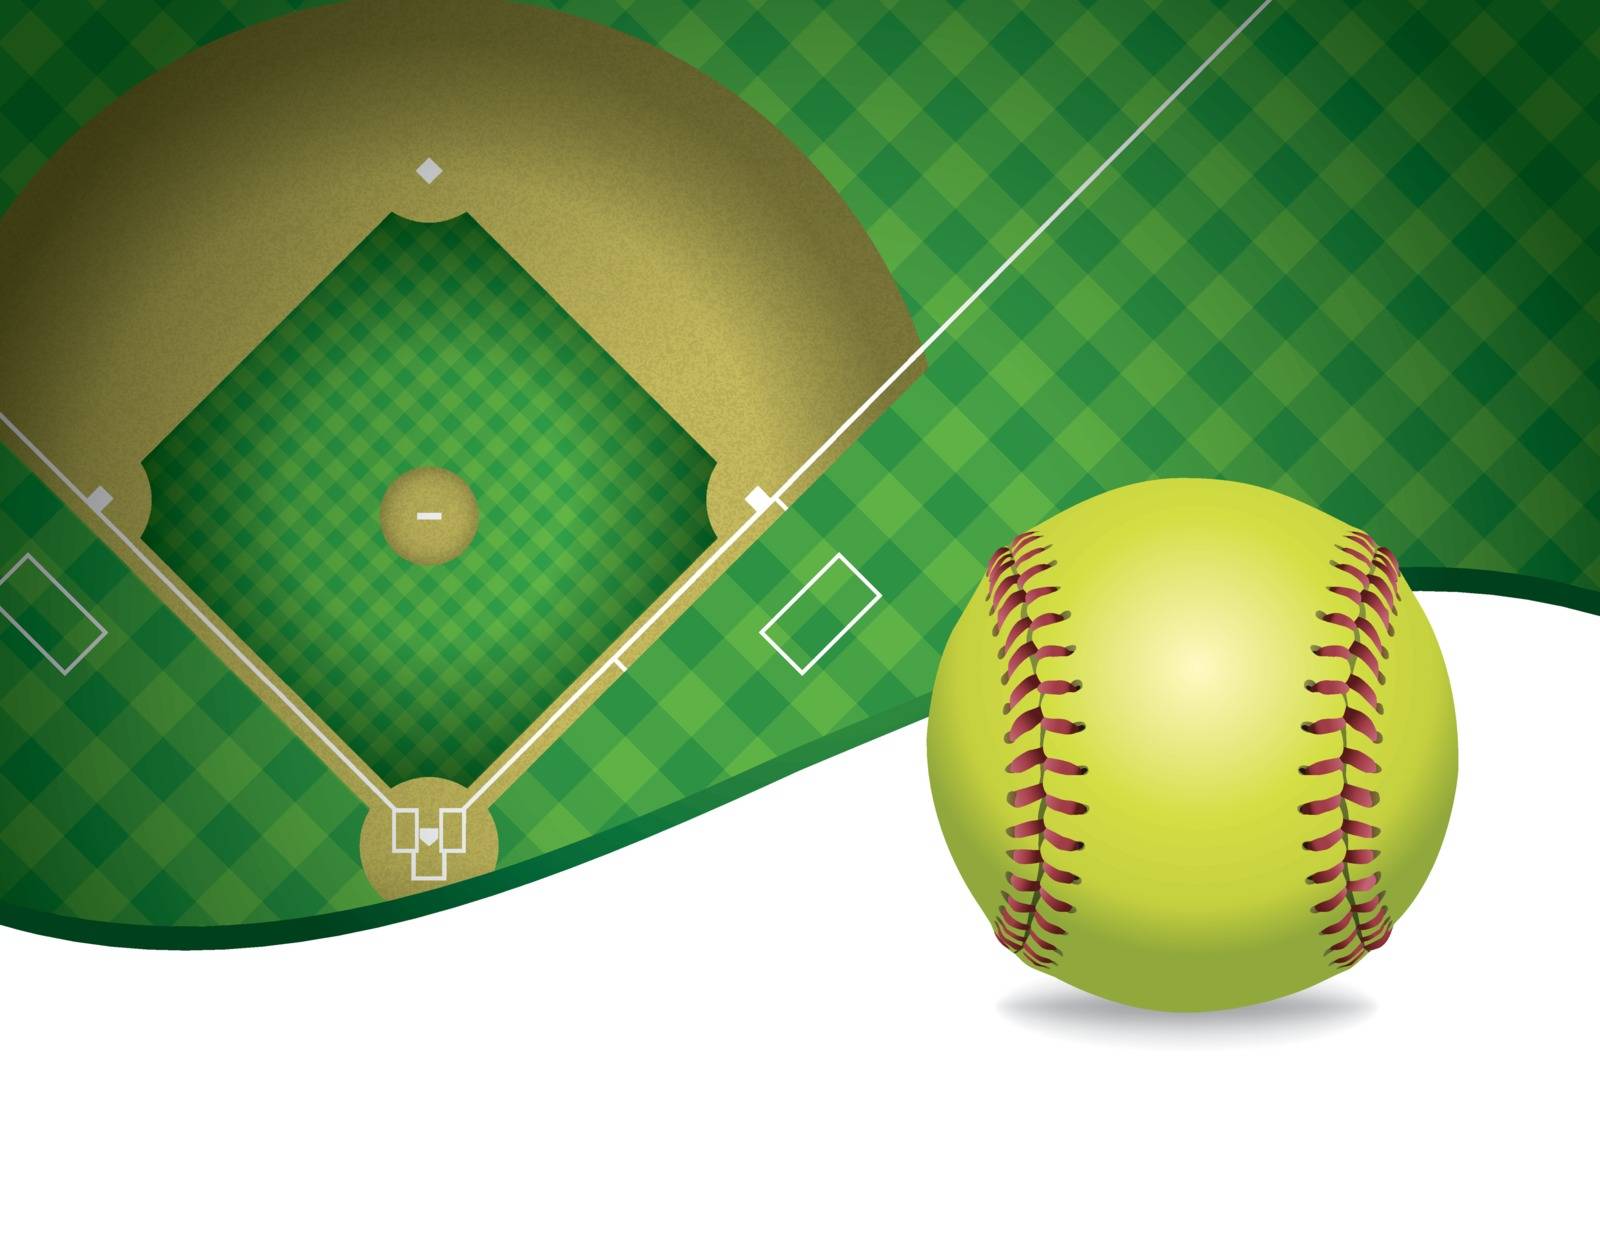 Softball and Field Copyspace Illustration by enterlinedesign